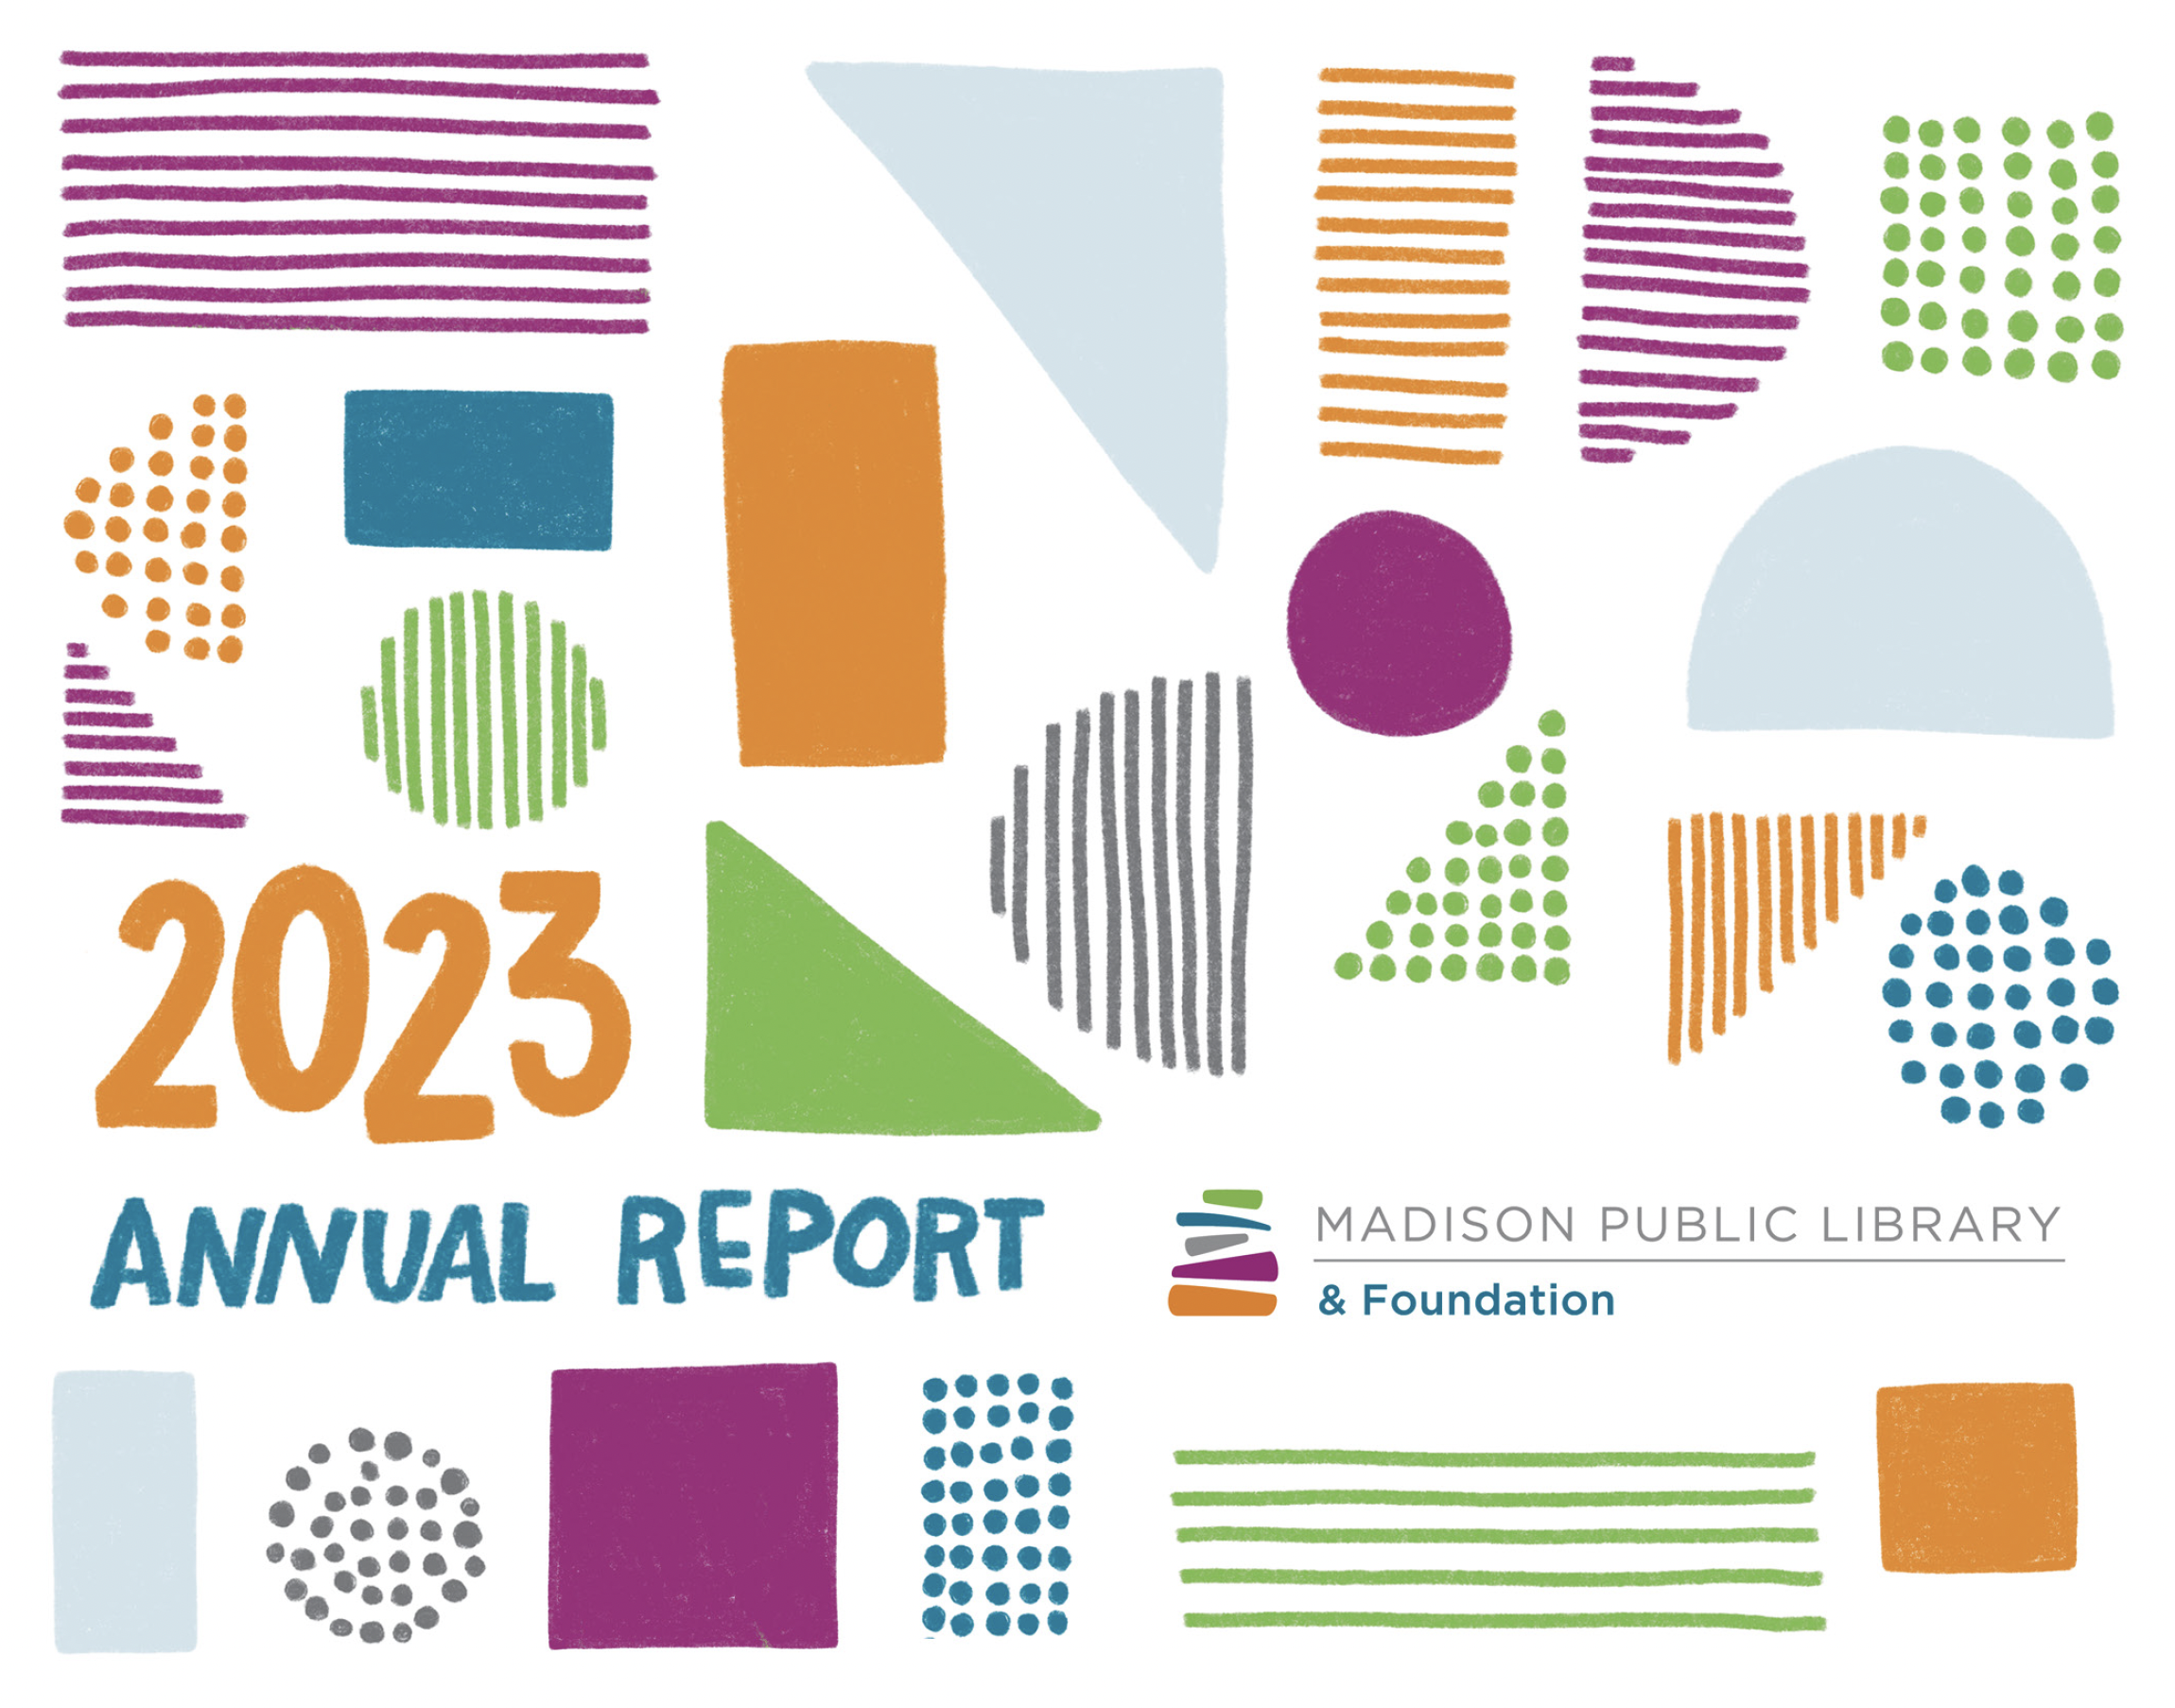 Artwork on cover of 2023 Madison Public Library and Foundation Annual Report